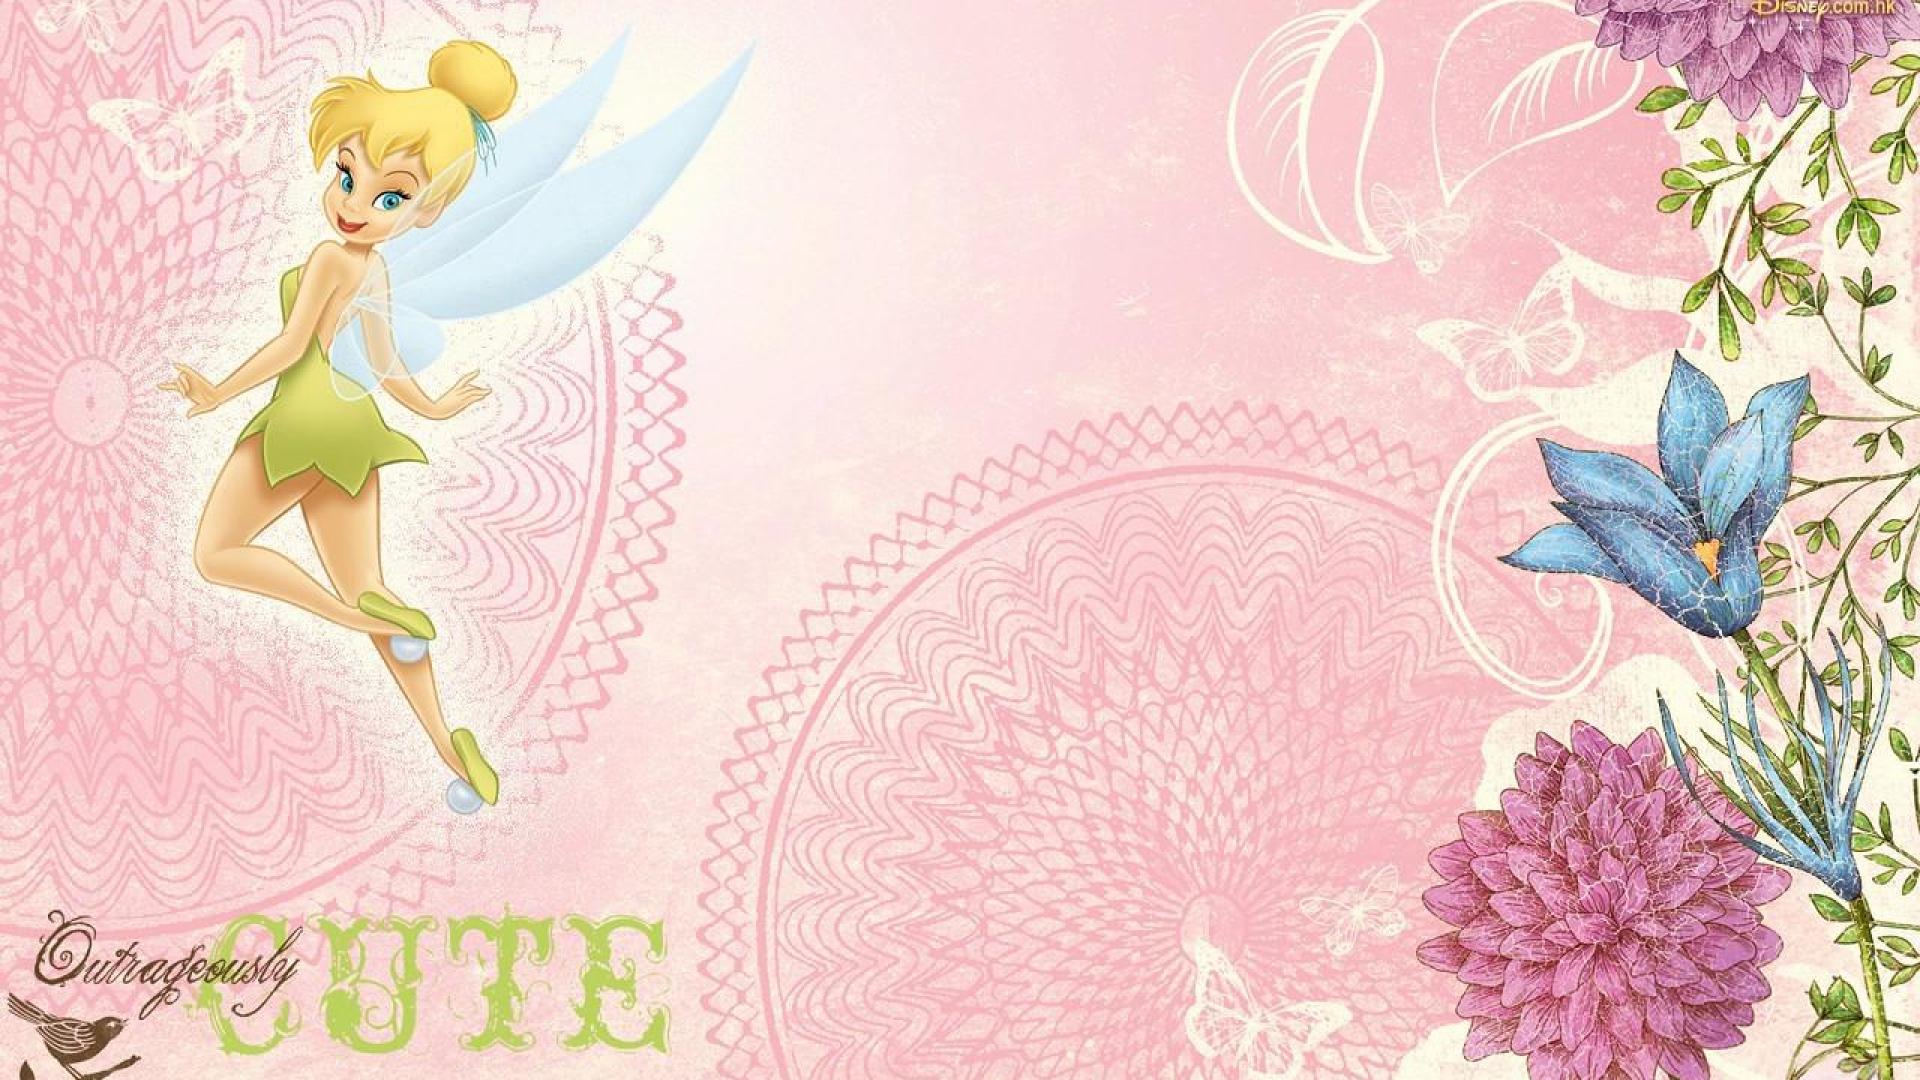 Tinkerbell - - High Quality and Resolution Wallpapers